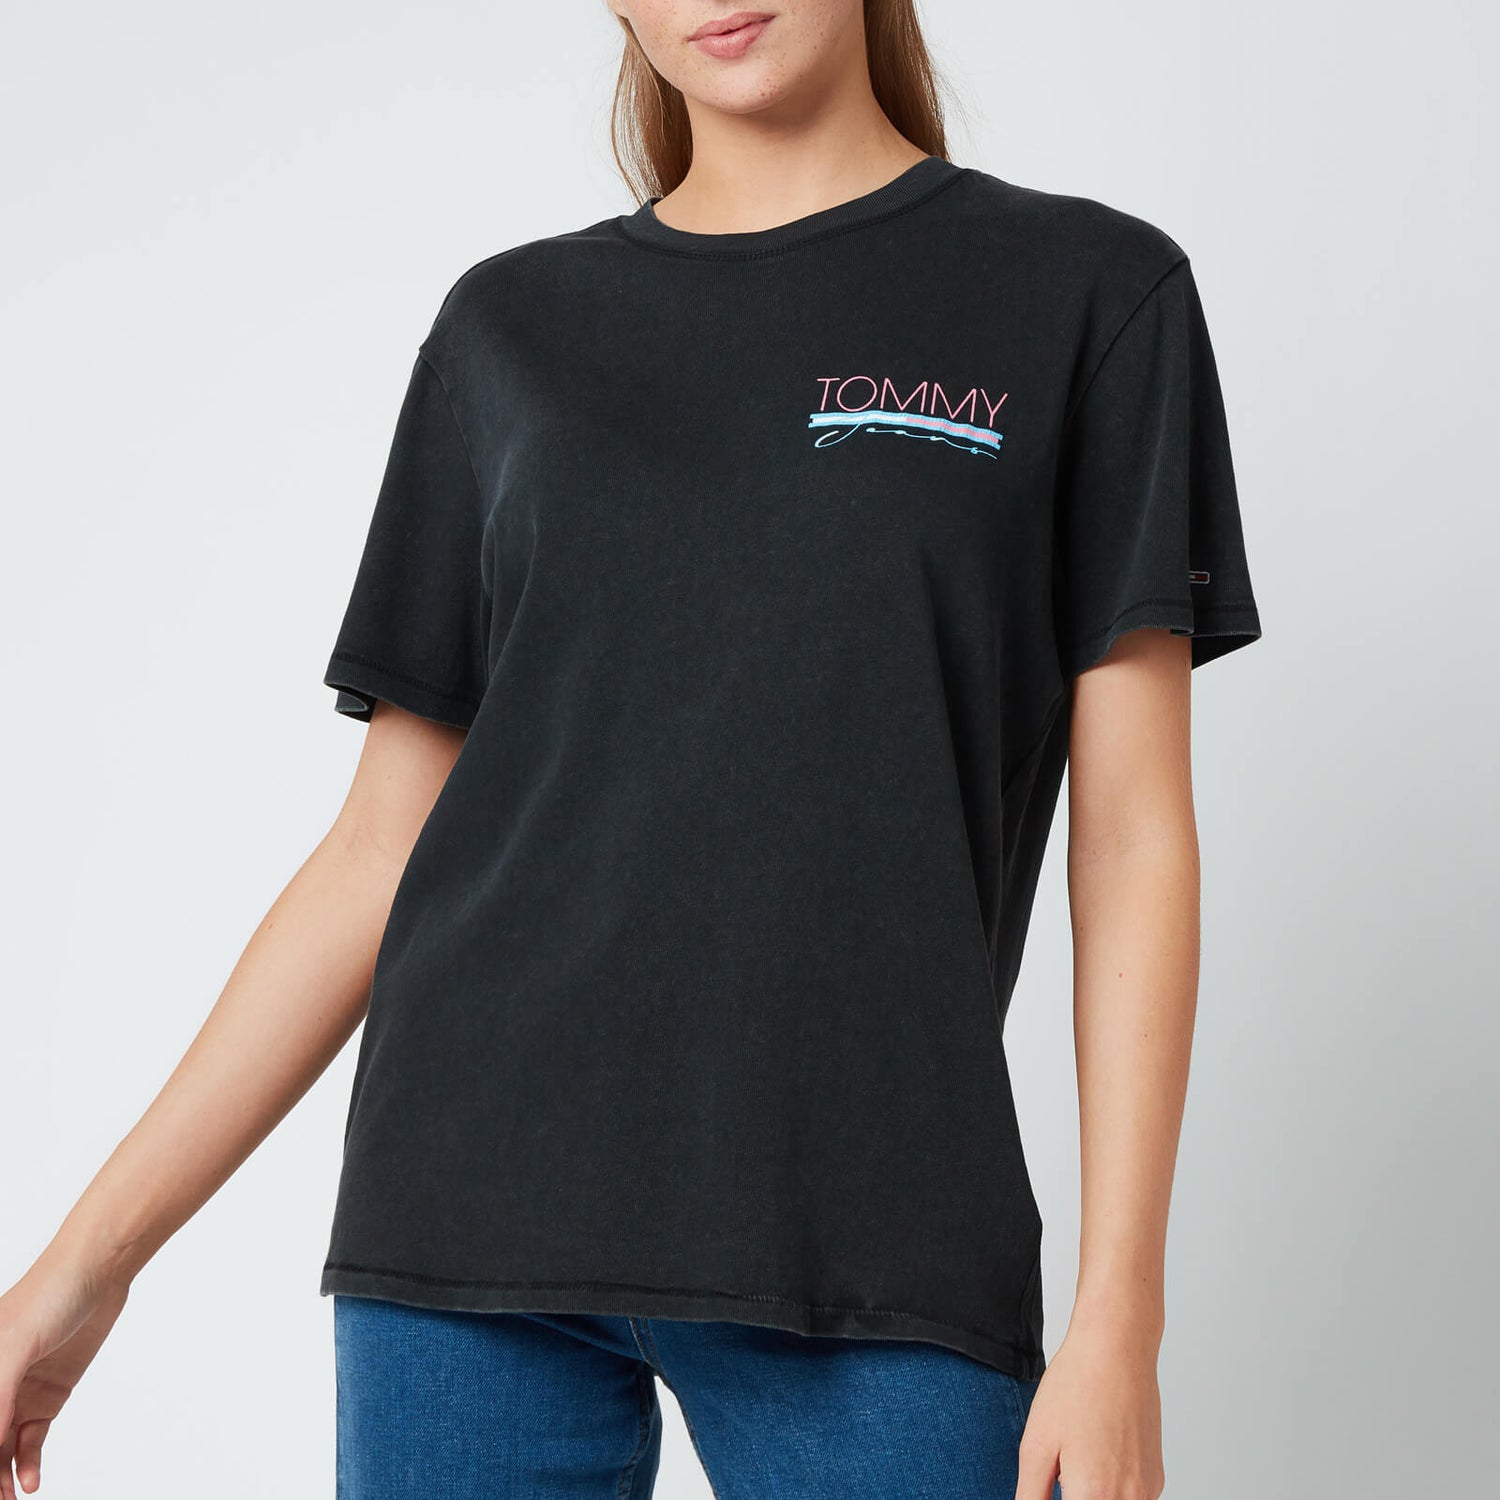 Tommy Jeans Women's Tjw Relaxed Back Vintage Tee - Black